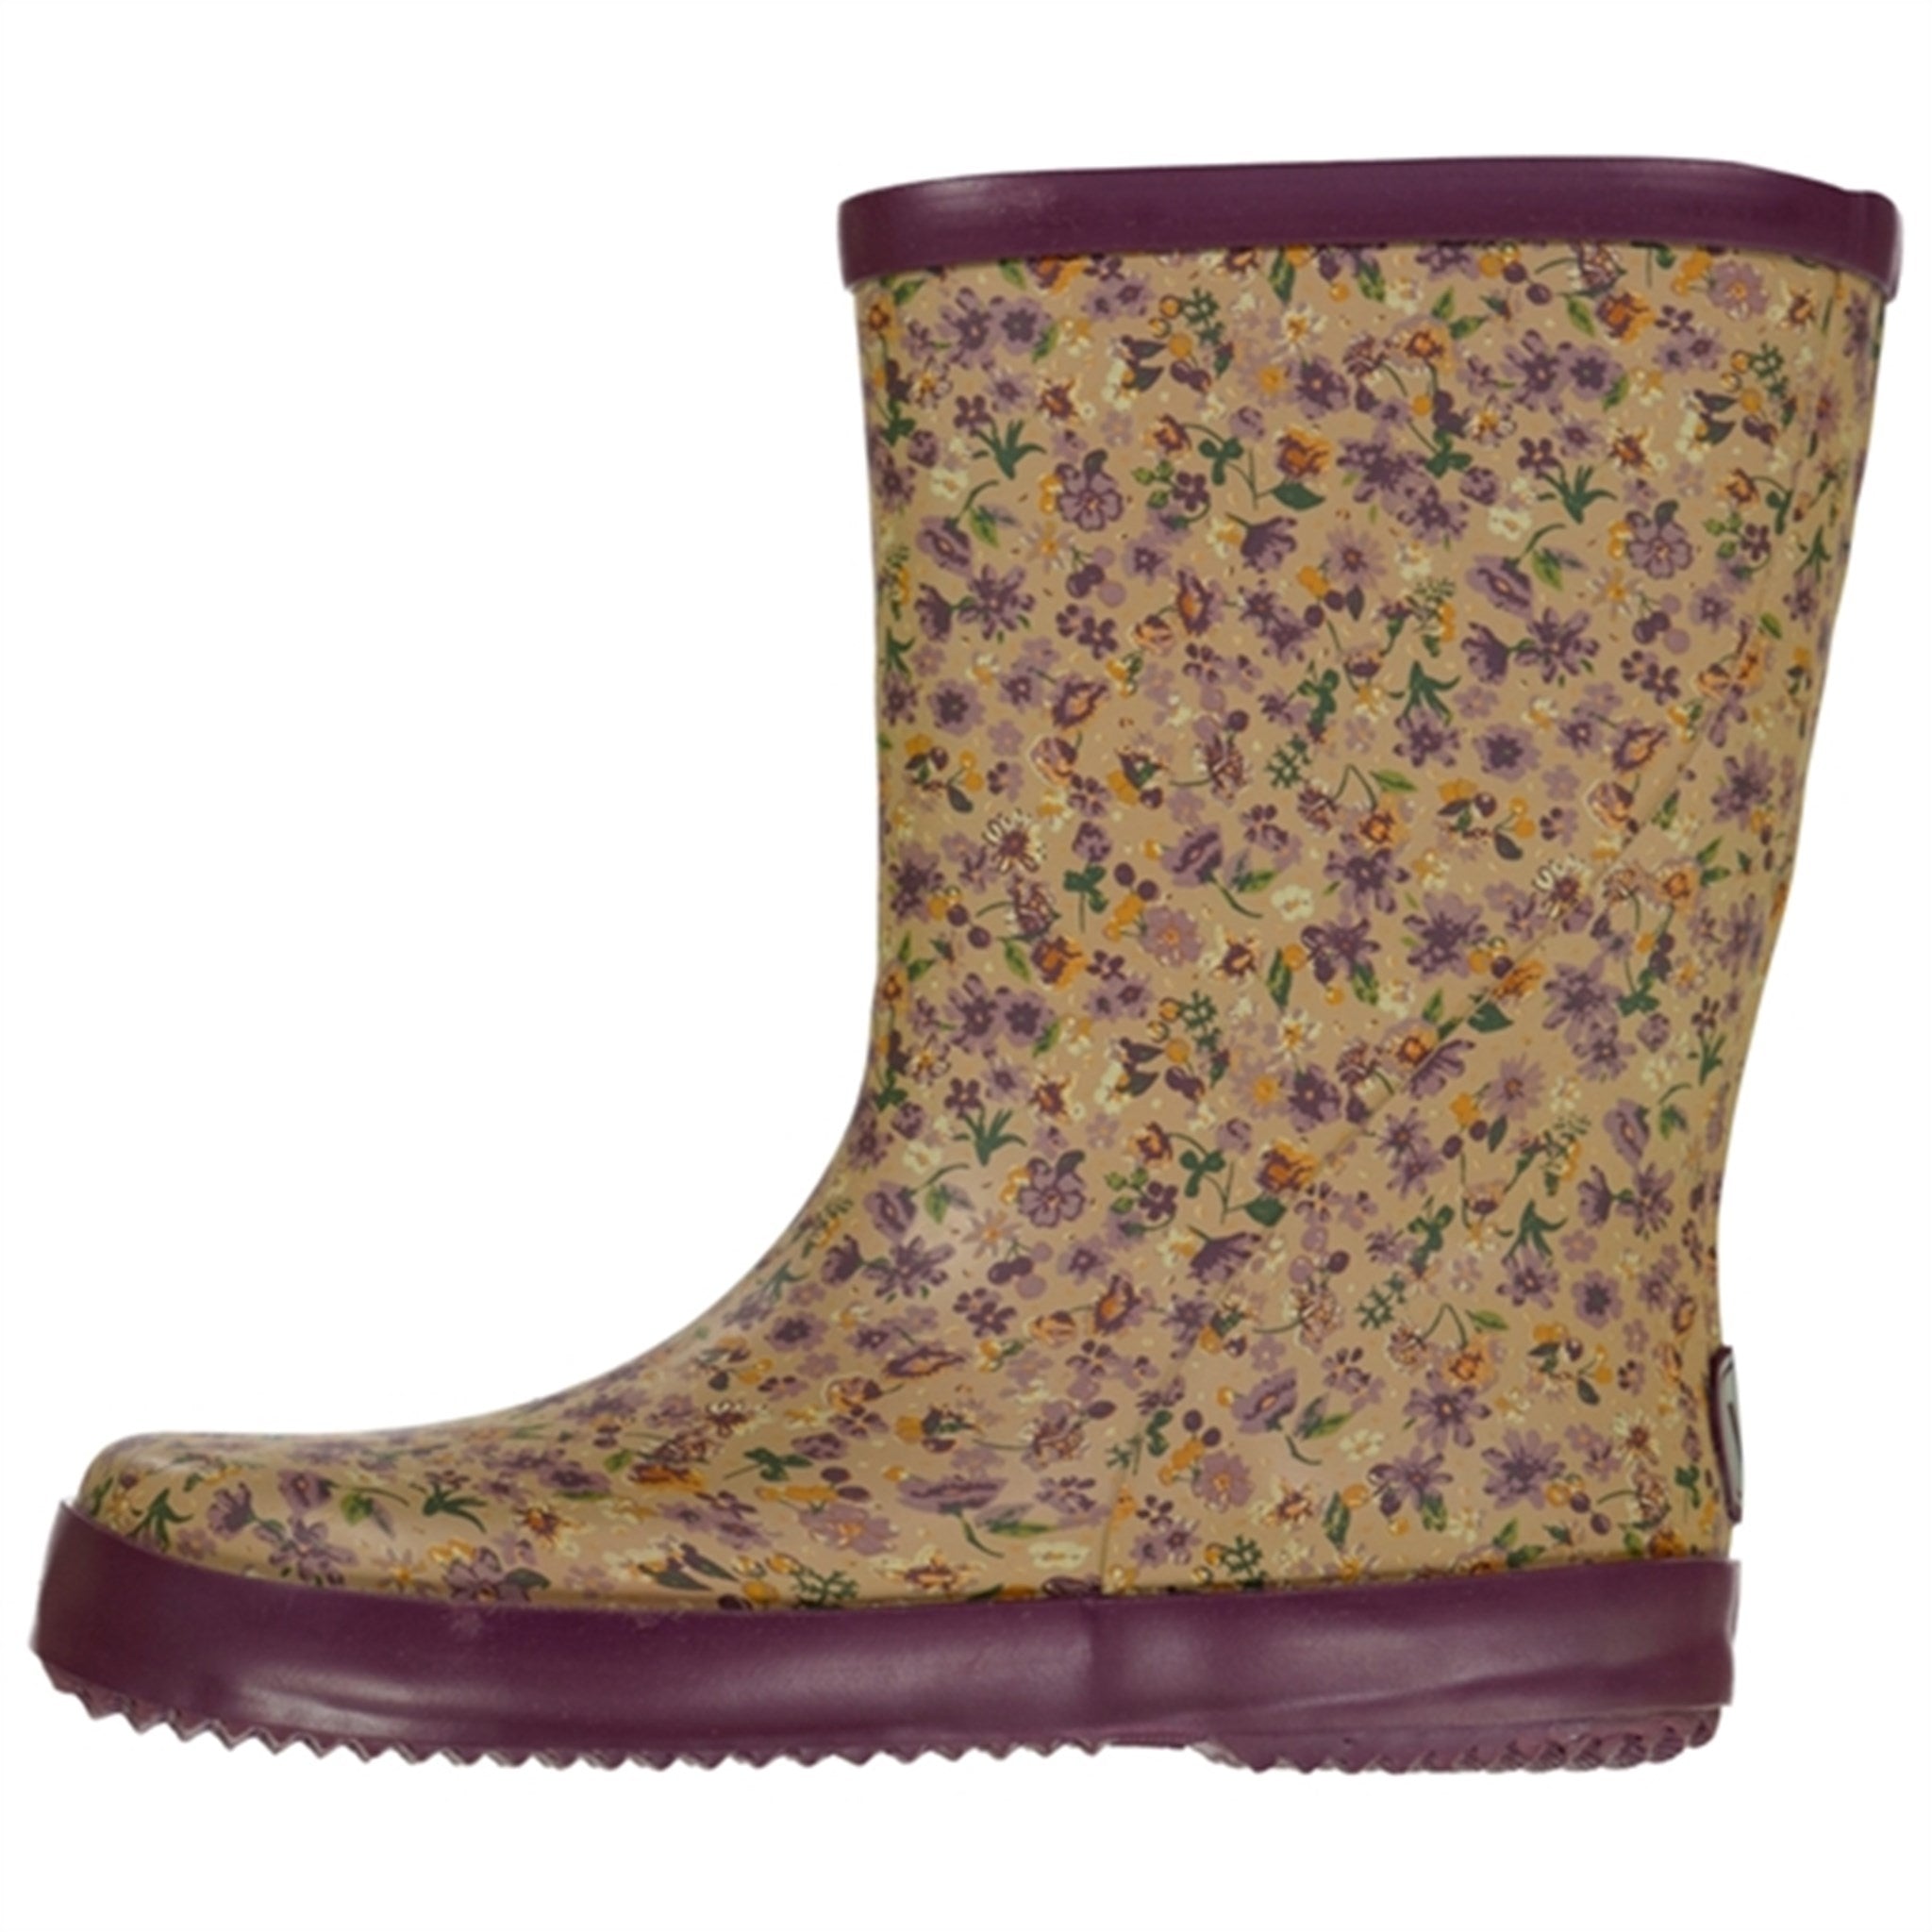 Wheat Rubber Boots Alpha Lilac FLowers